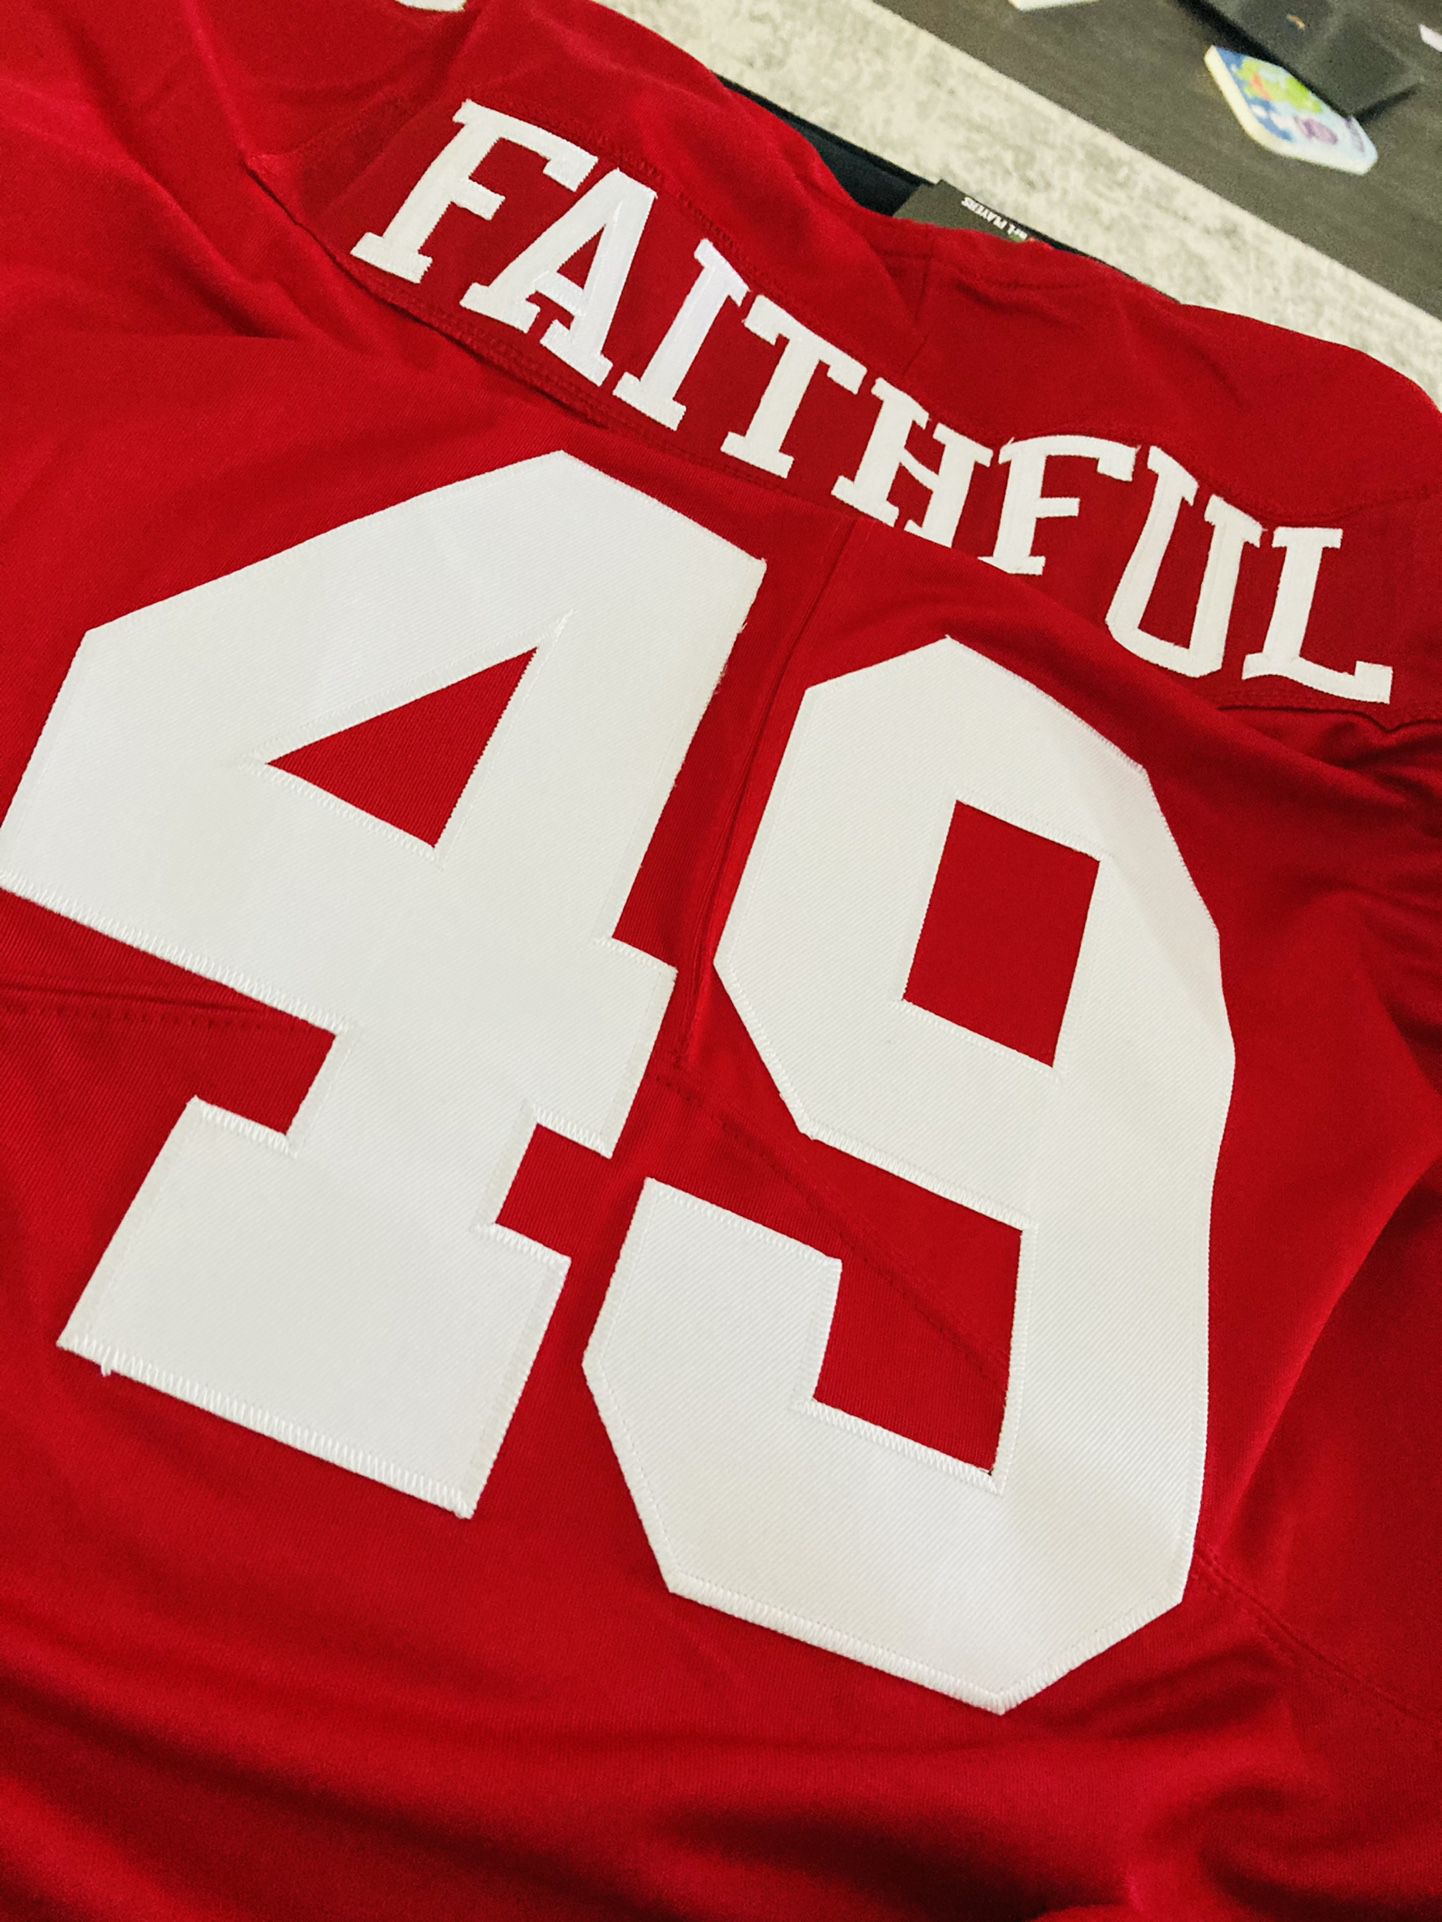 49ers jersey with stitched numbers